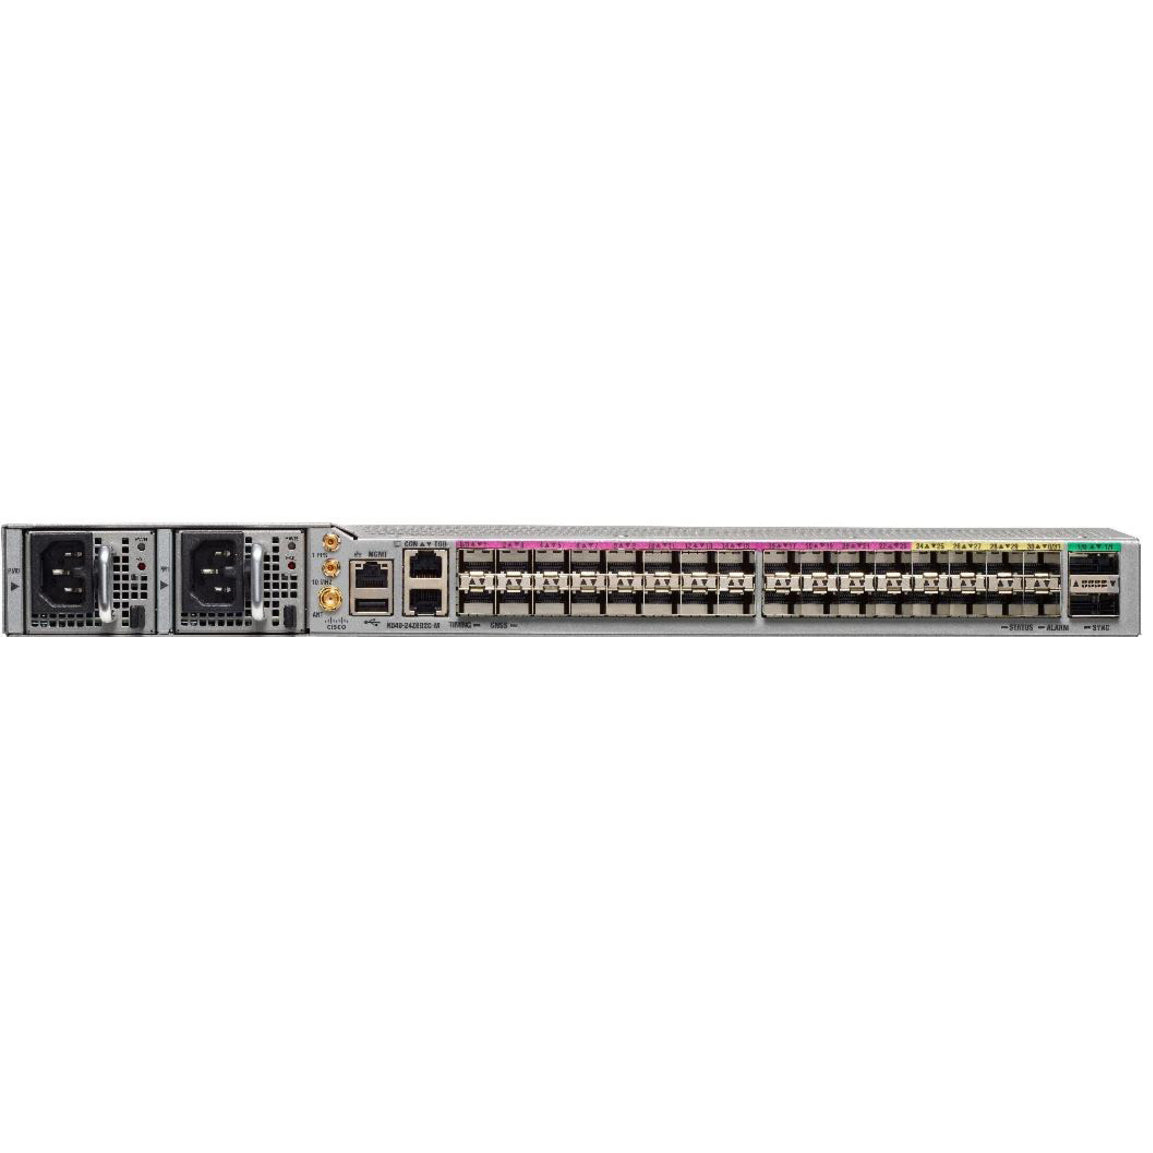 Cisco Router Chassis (N540-24Z8Q2C-SYS)